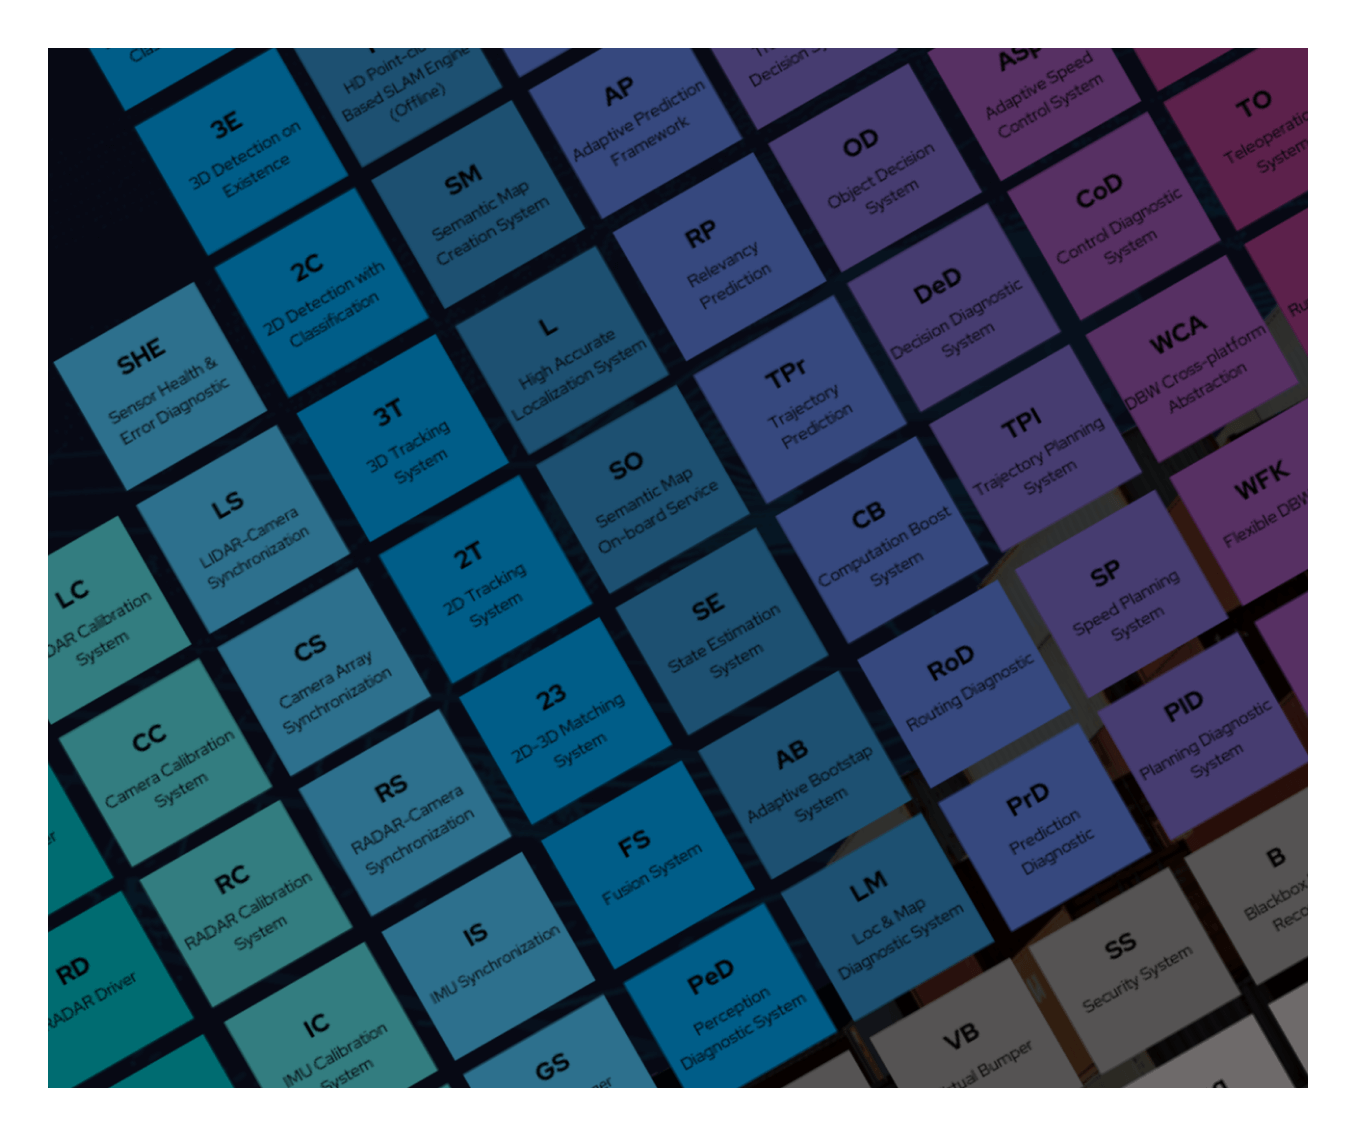 An isometric layout of tiles with Cyngn's product features